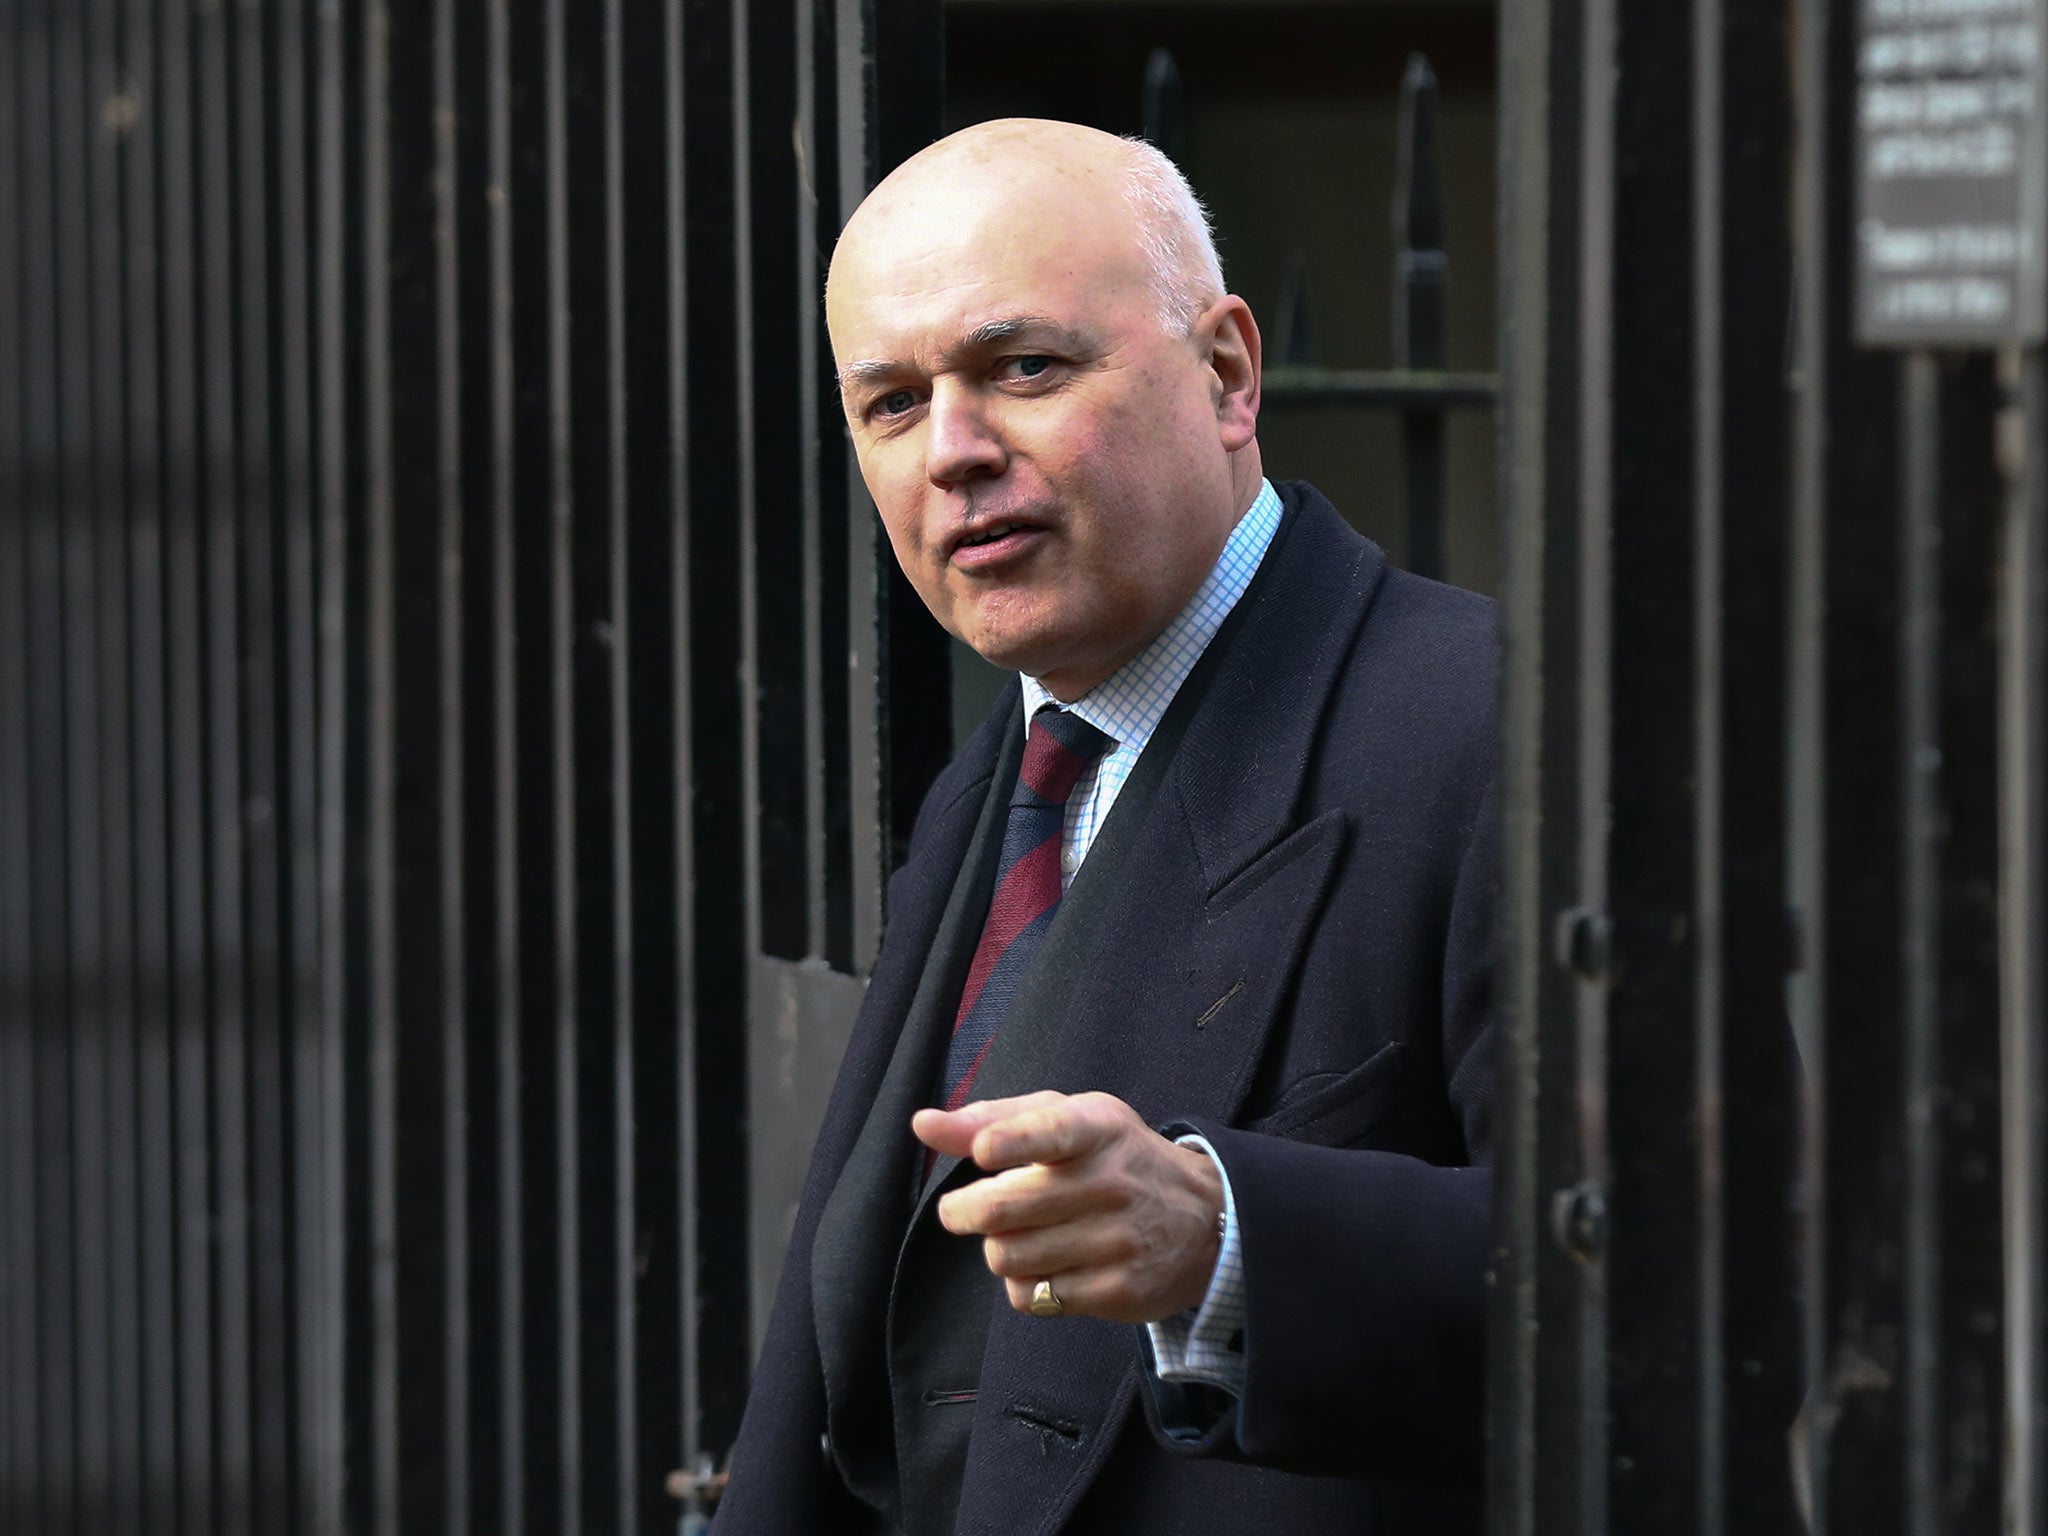 Iain Duncan Smith had reportedly threatened to resign before